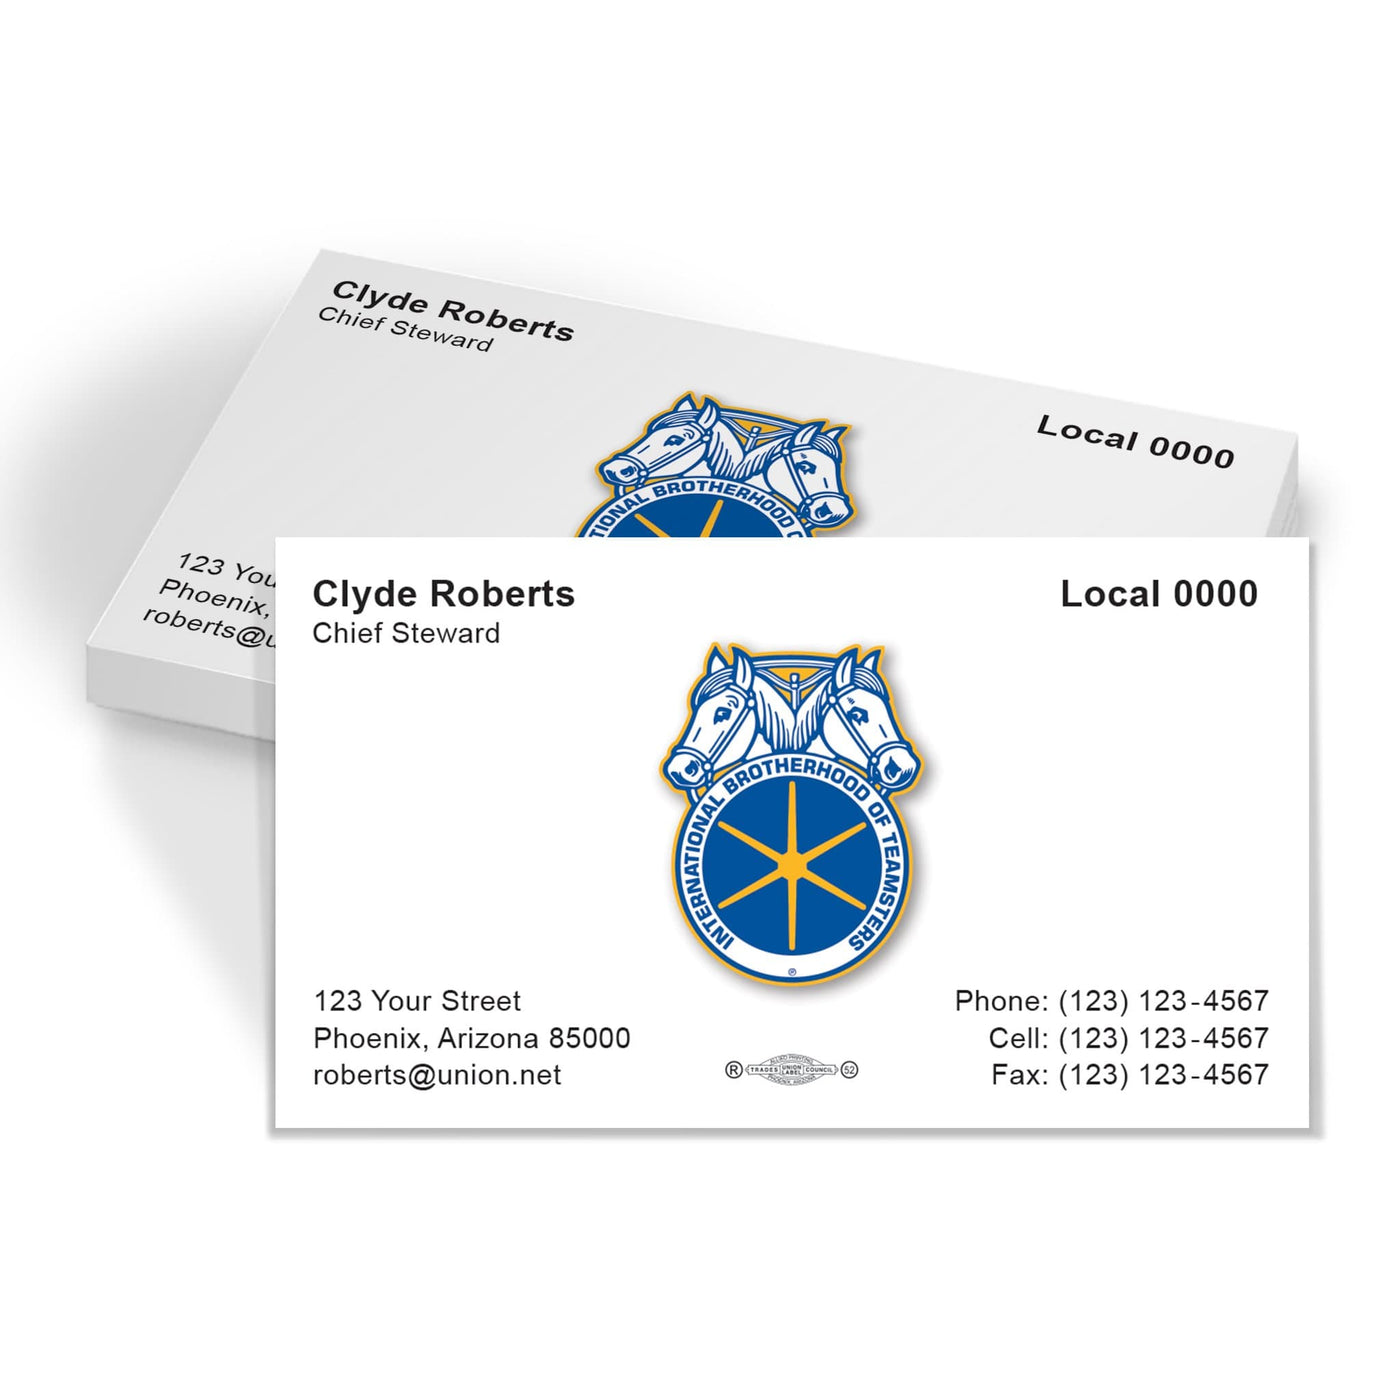 Teamsters Union Printed Business Cards - Teamsters-101